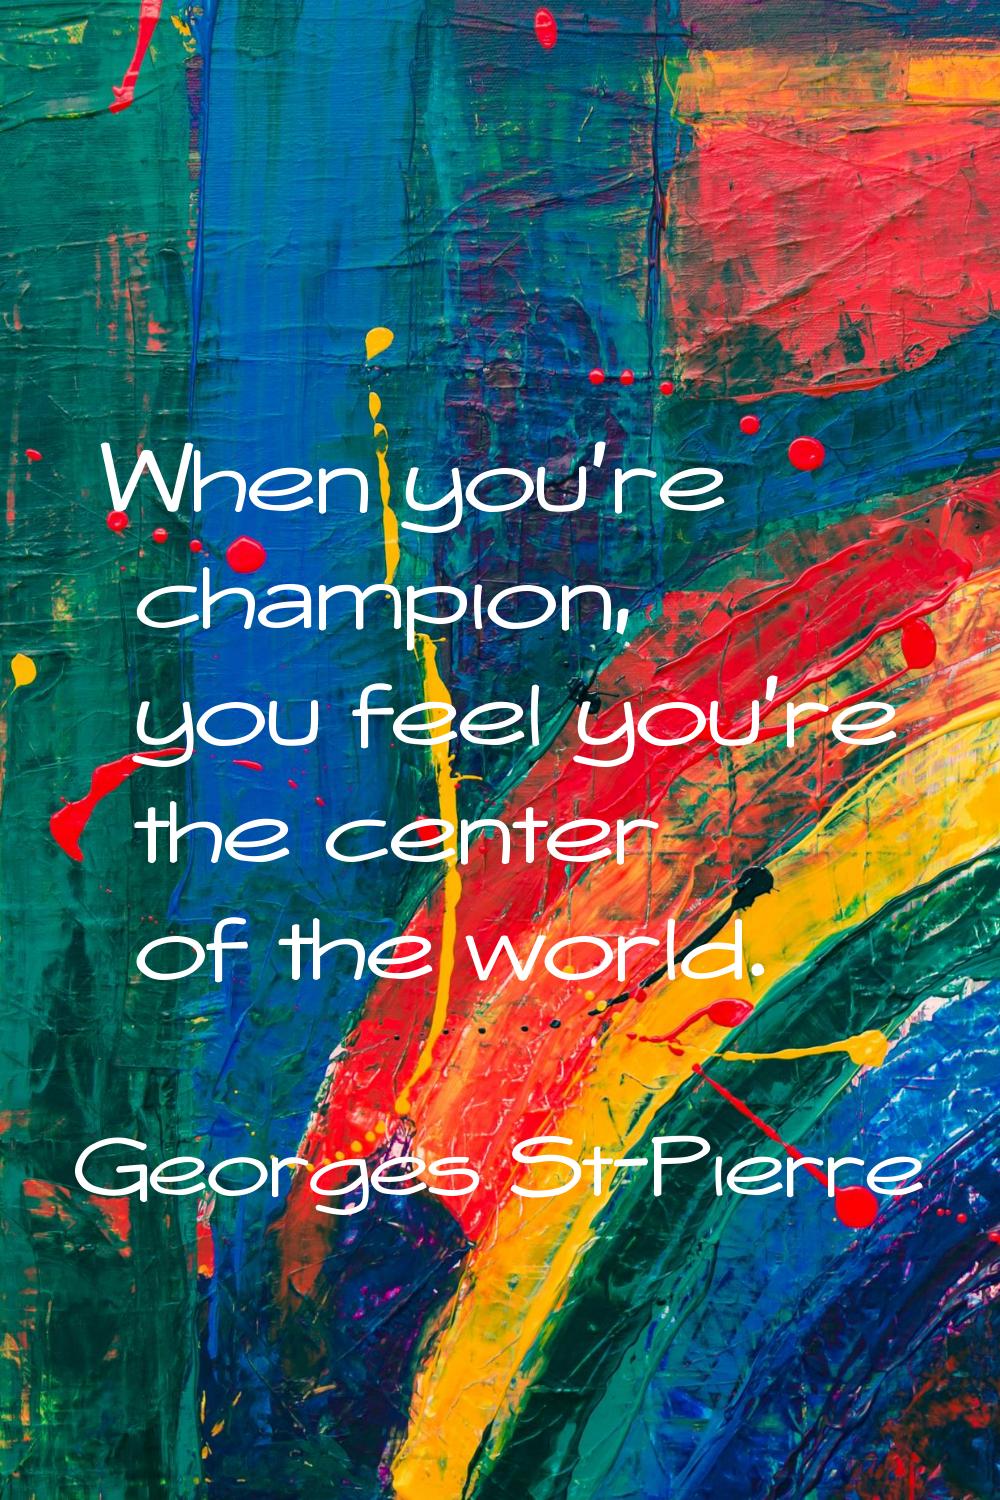 When you're champion, you feel you're the center of the world.